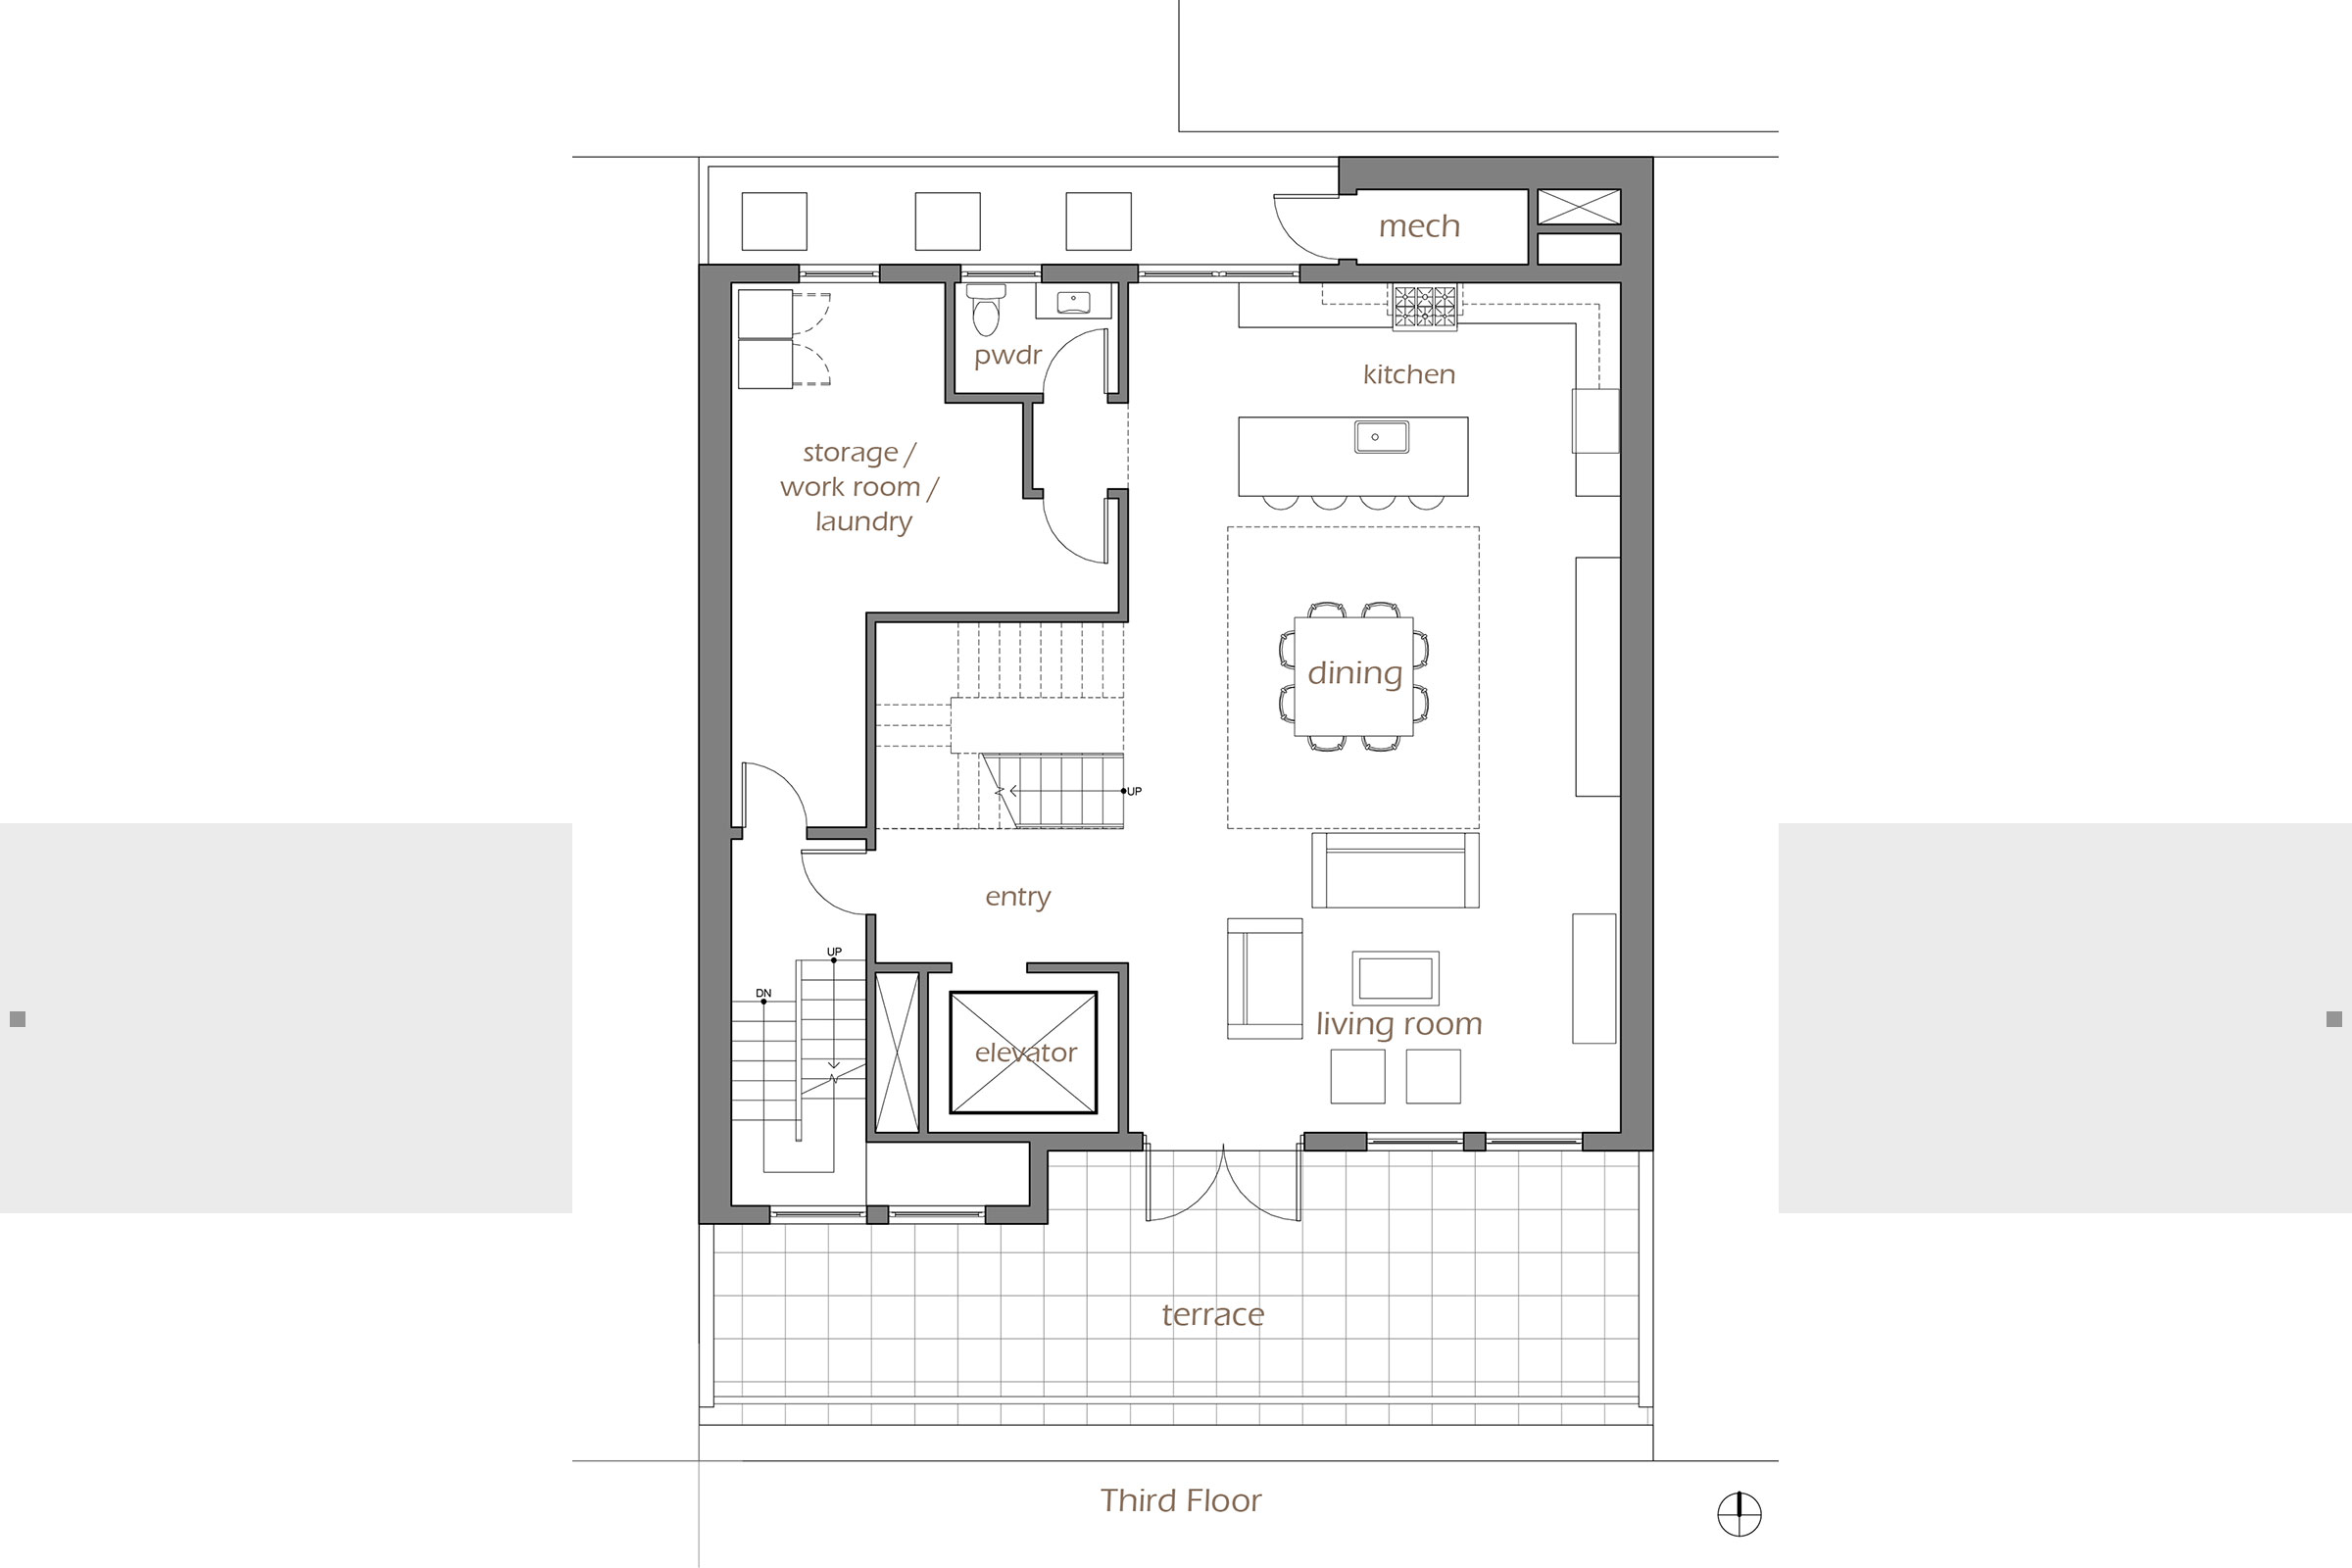 blueprint layout of third floor of residence